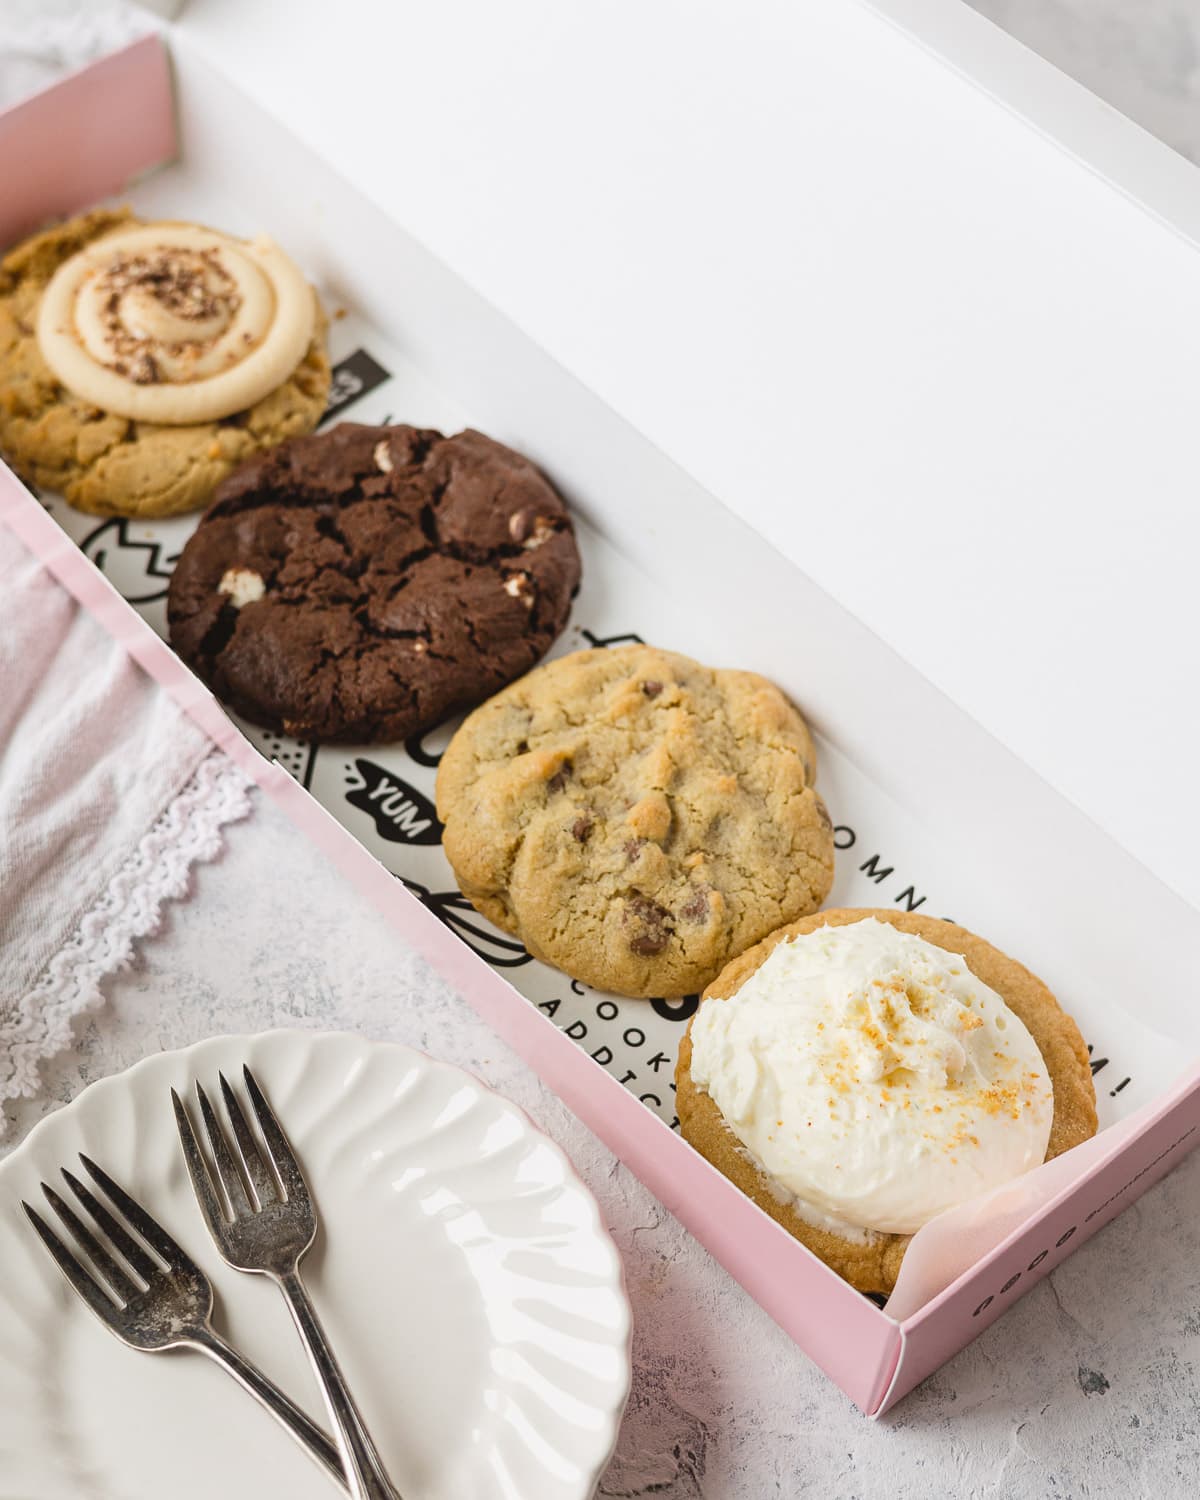 A pink box of four large bakery cookies and a stack of plates with two small forks.